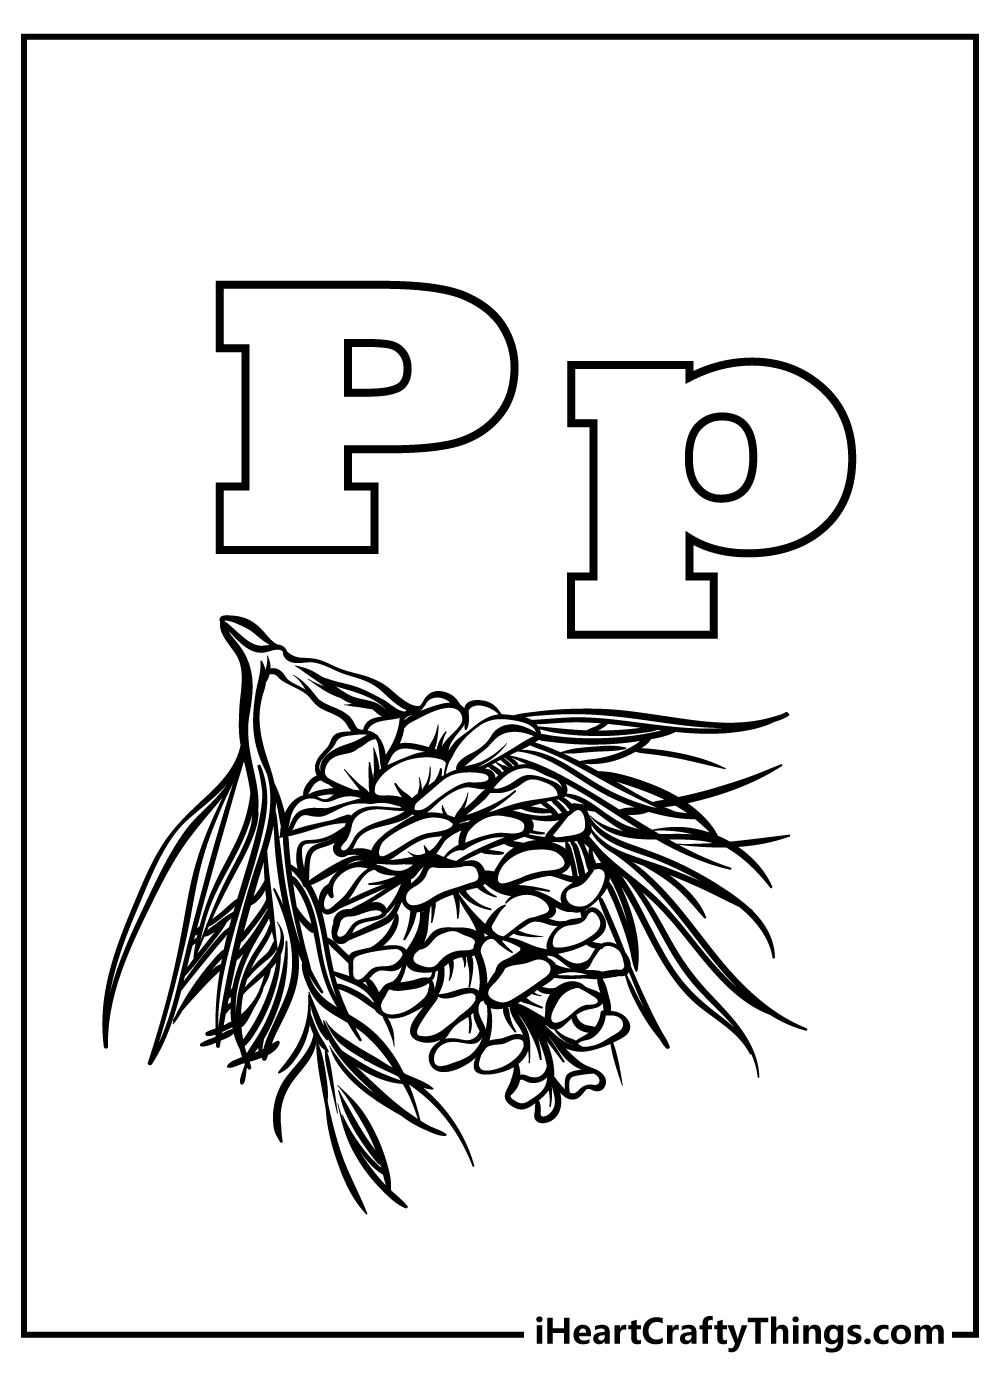 Letter P Coloring Book for adults free download